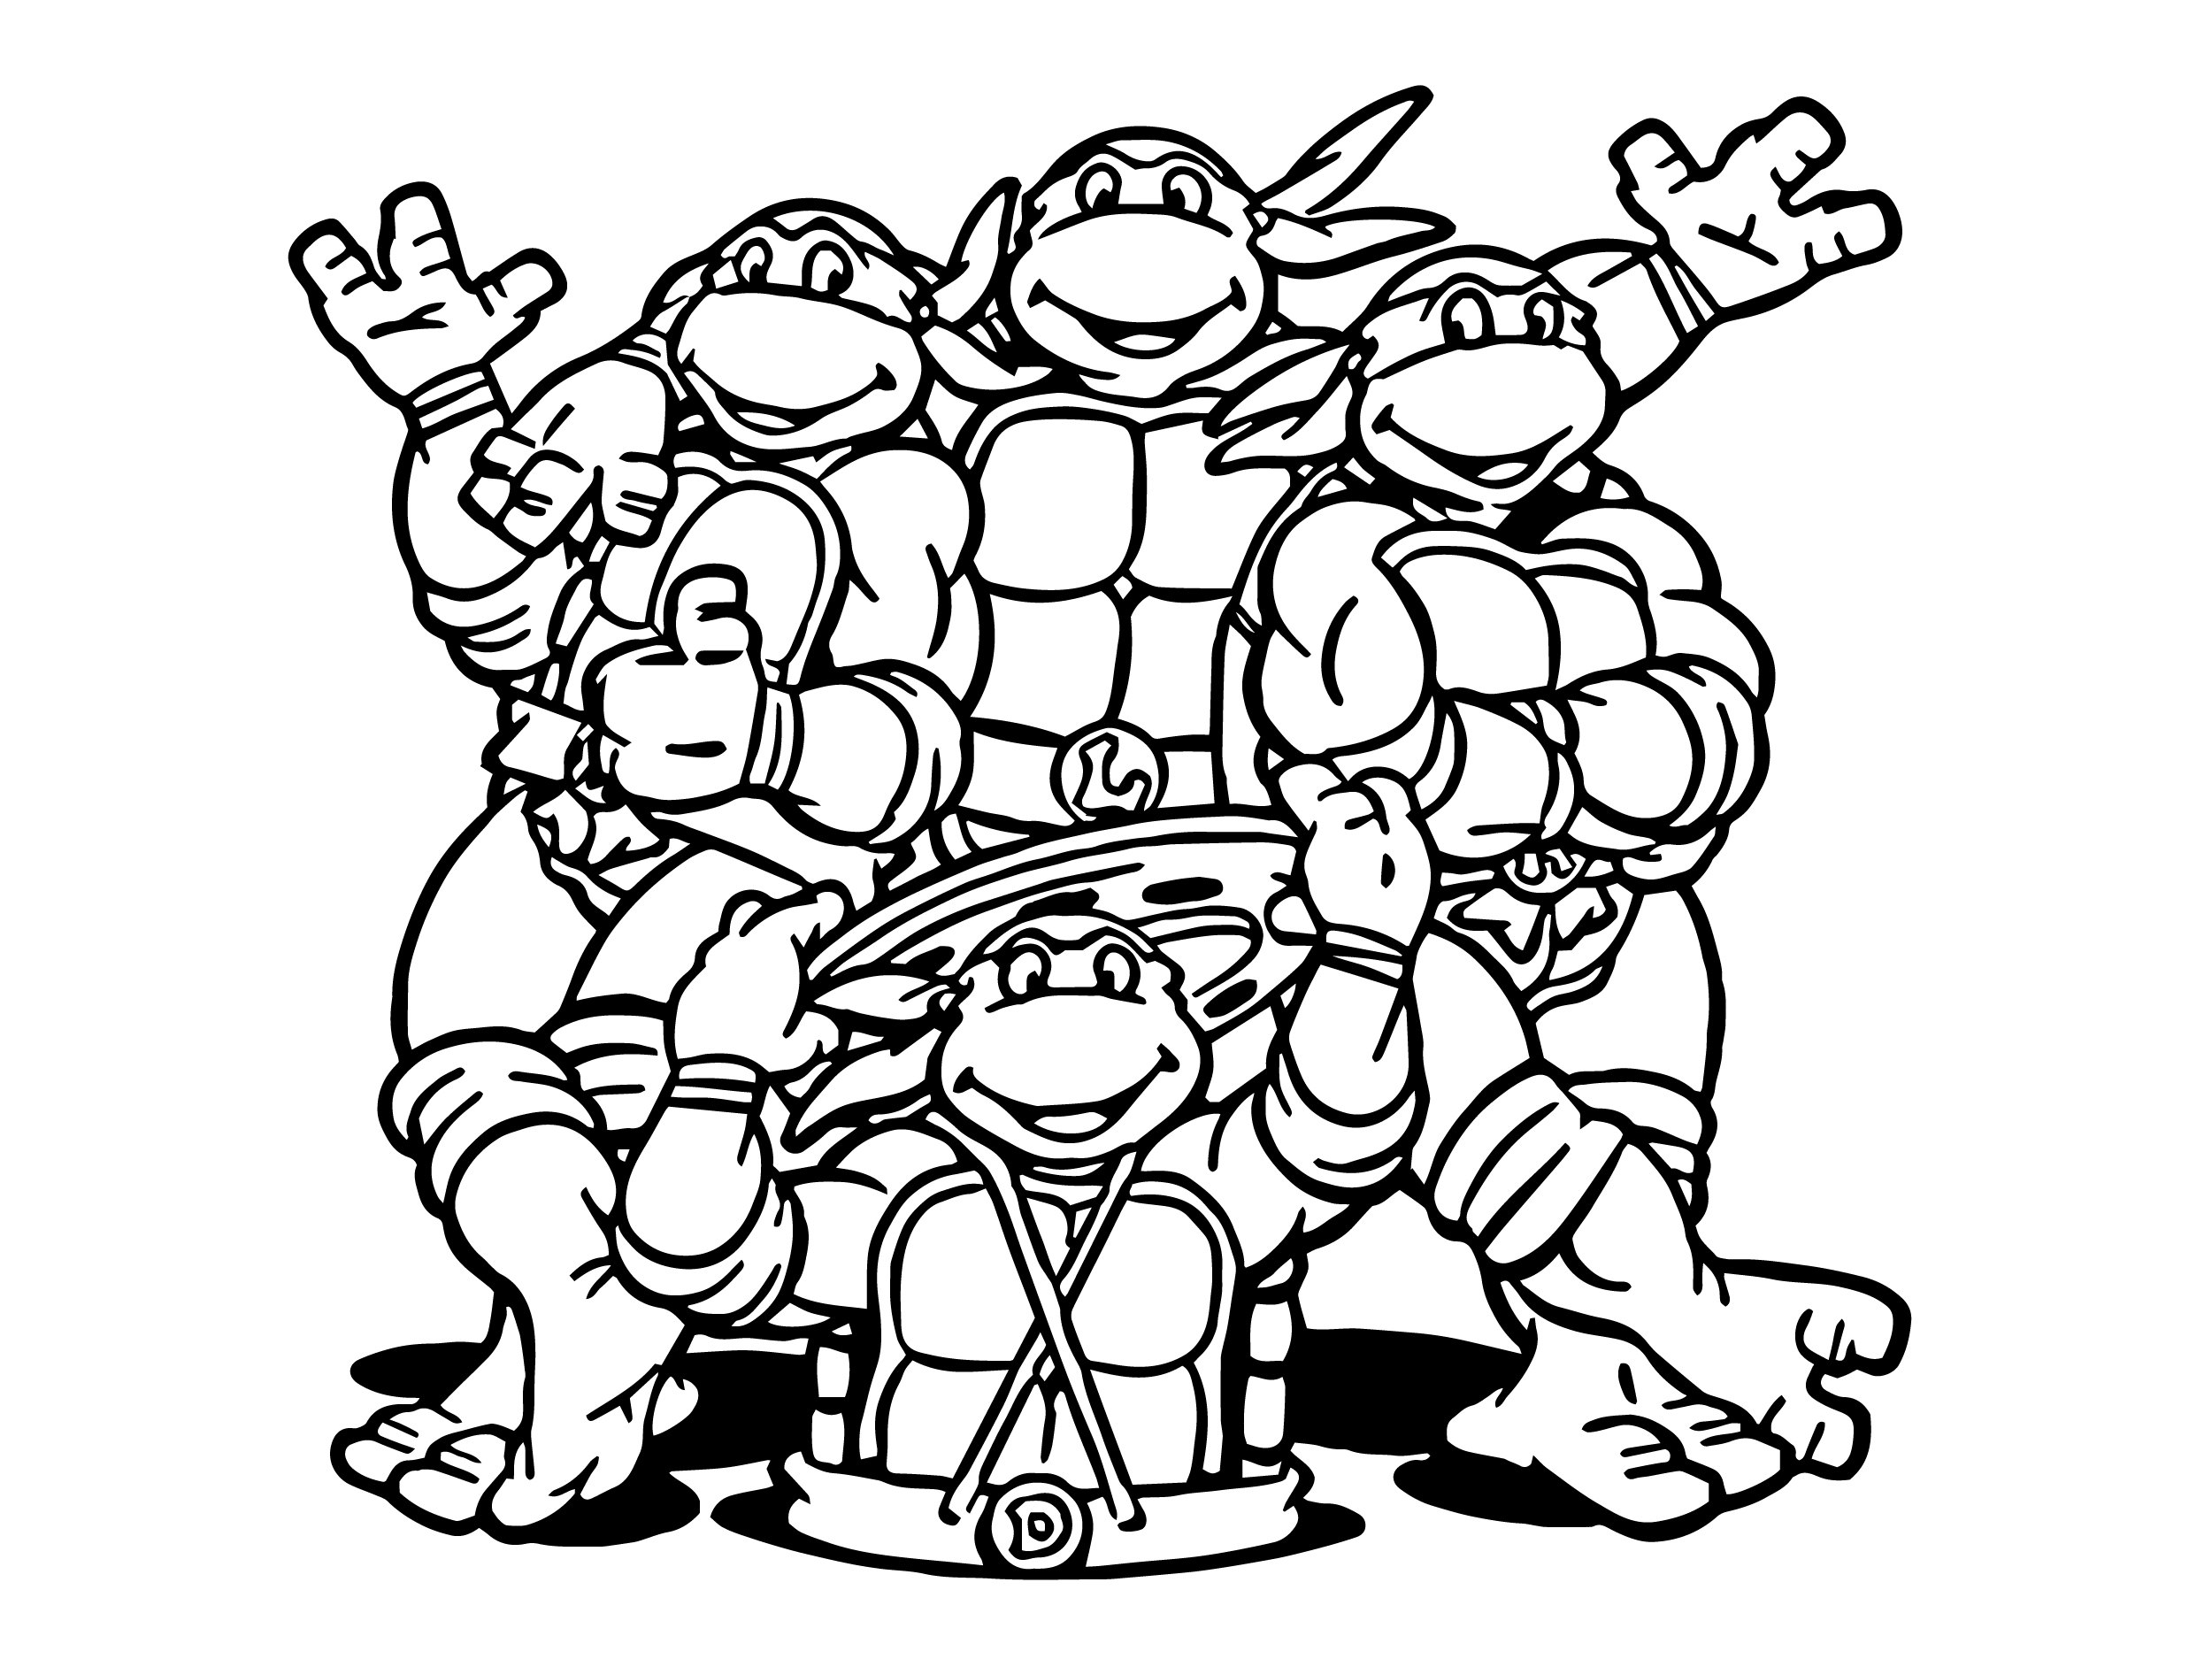 Ninja Turtle Face Coloring Pages at GetDrawings | Free download